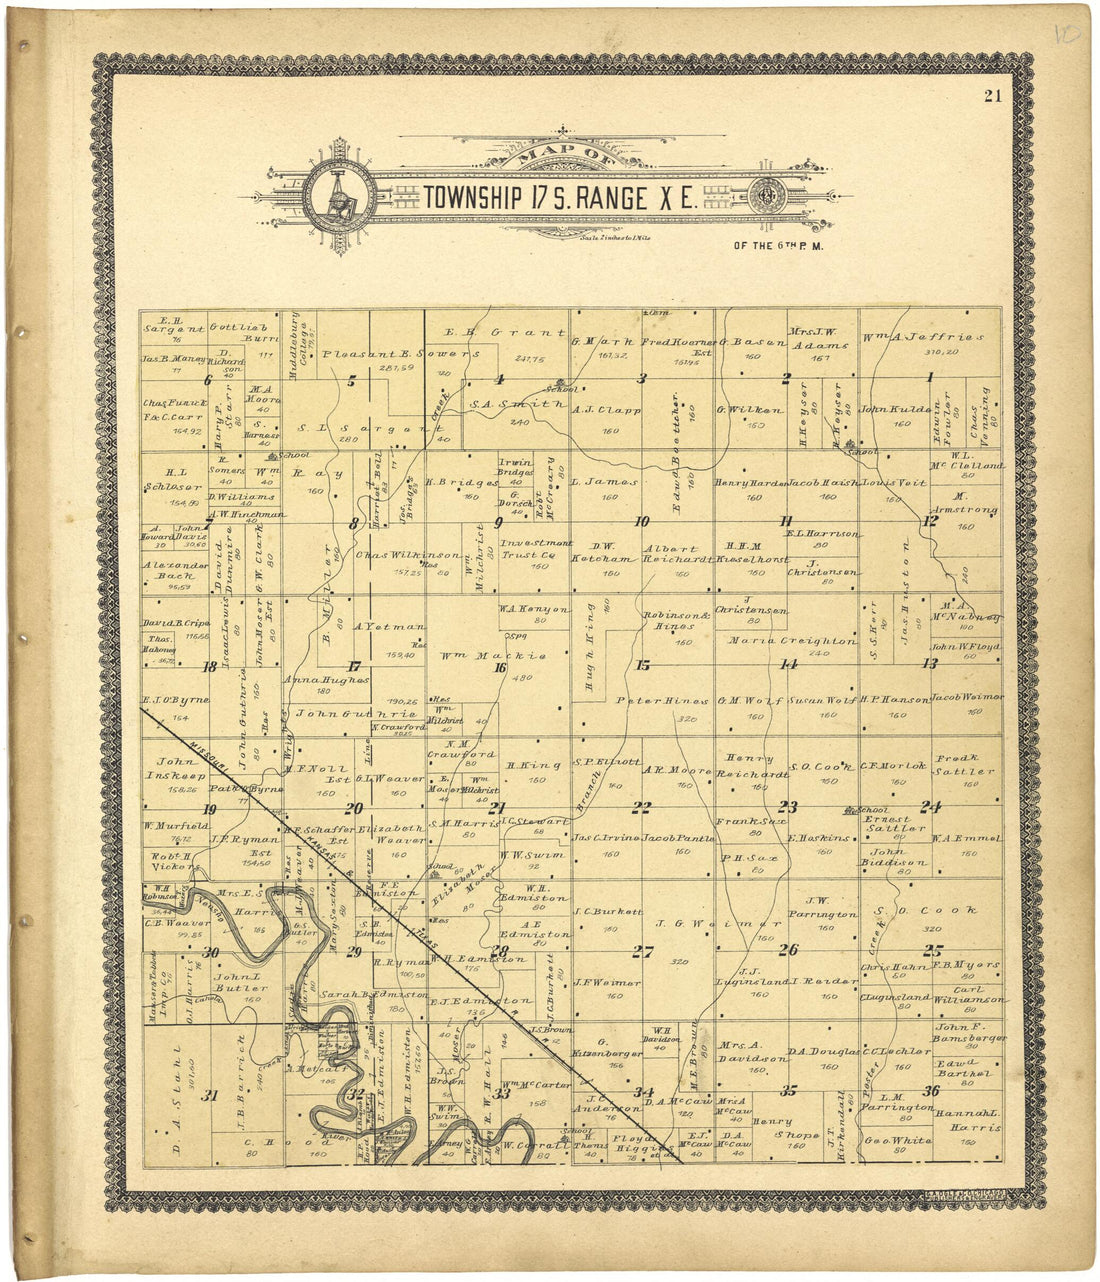 This old map of Map of Township 17 S. Range X E. from Standard Atlas of Lyon County, Kansas from 1901 was created by  Geo. A. Ogle &amp; Co in 1901